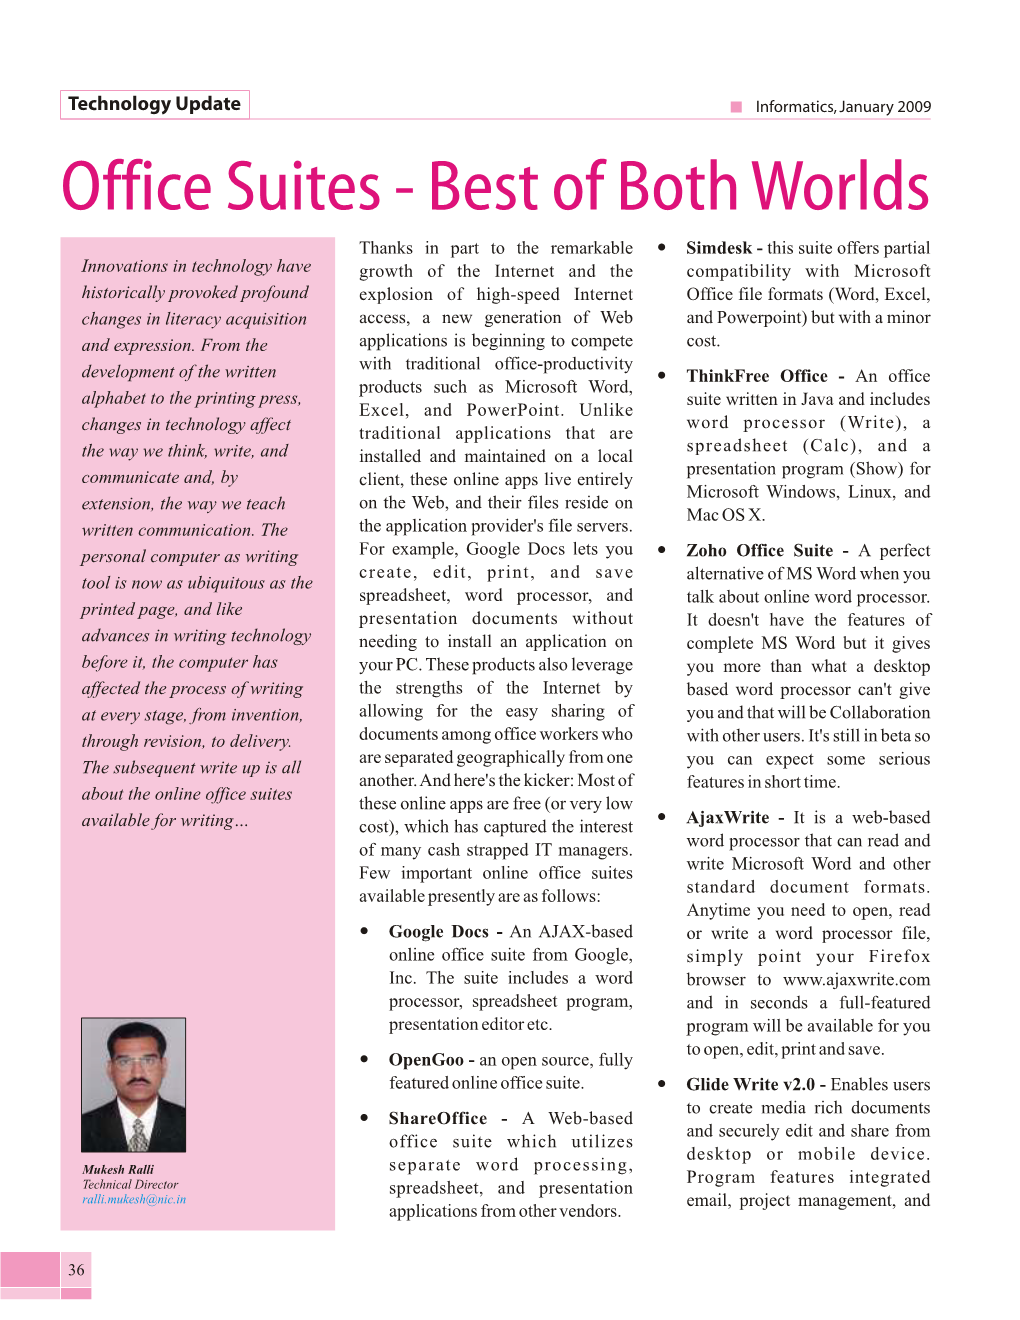 Office Suites - Best of Both Worlds Collaborate on Documents